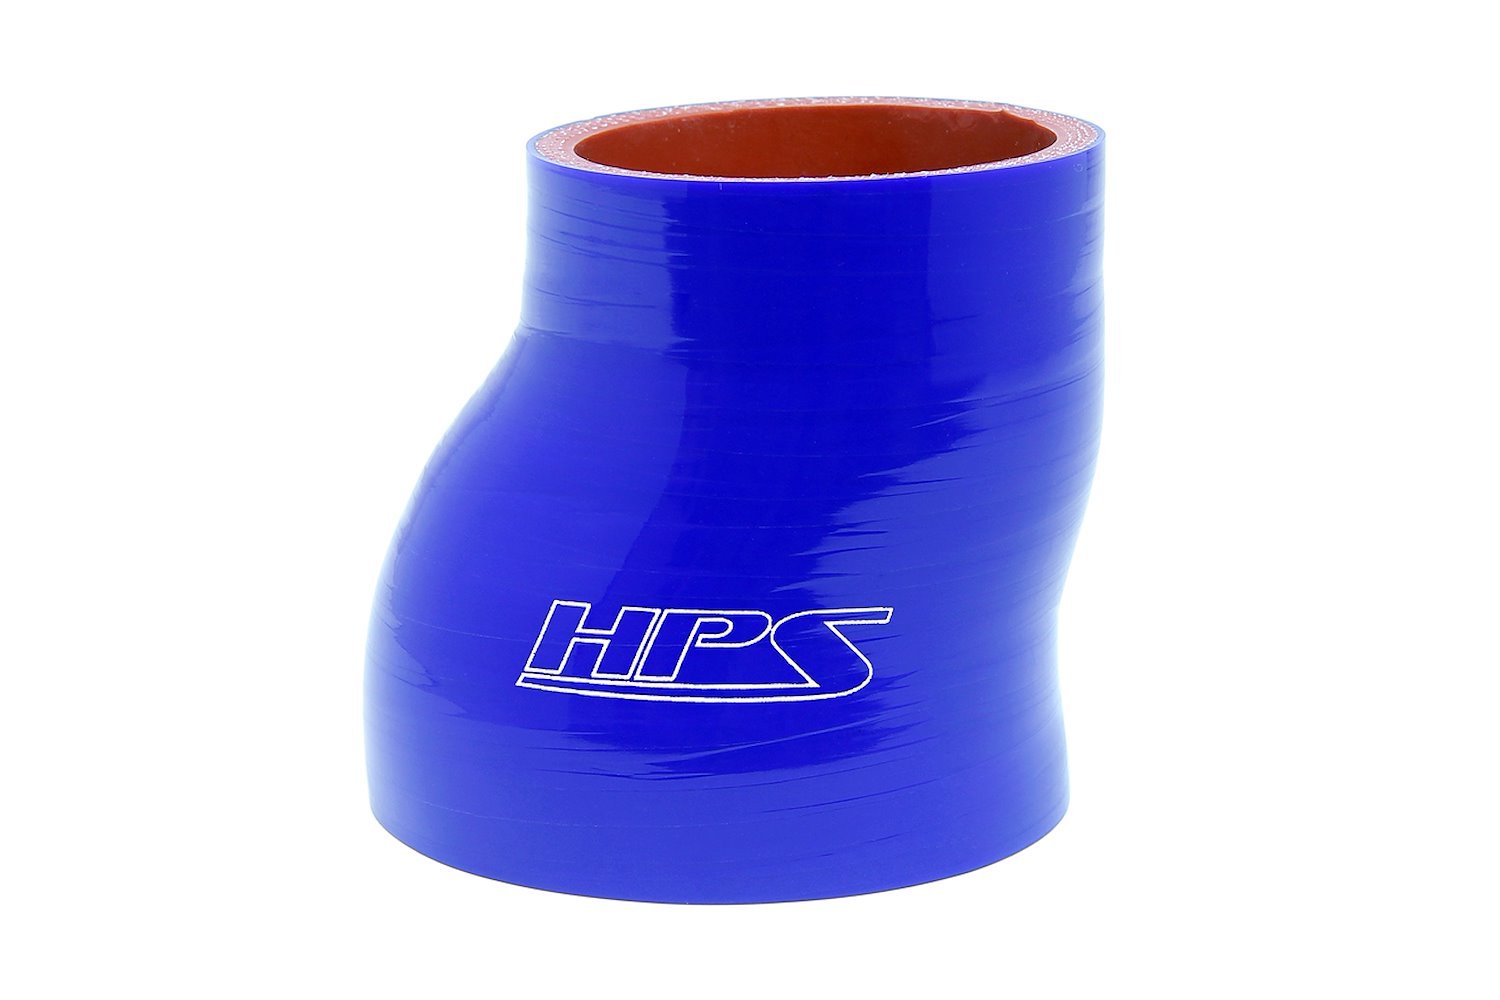 HTSOR-250-300-BLUE Silicone Offset Reducer Hose, High-Temp Reinforced, 2-1/2 in. - 3 in. ID, 3 in. Long, Blue